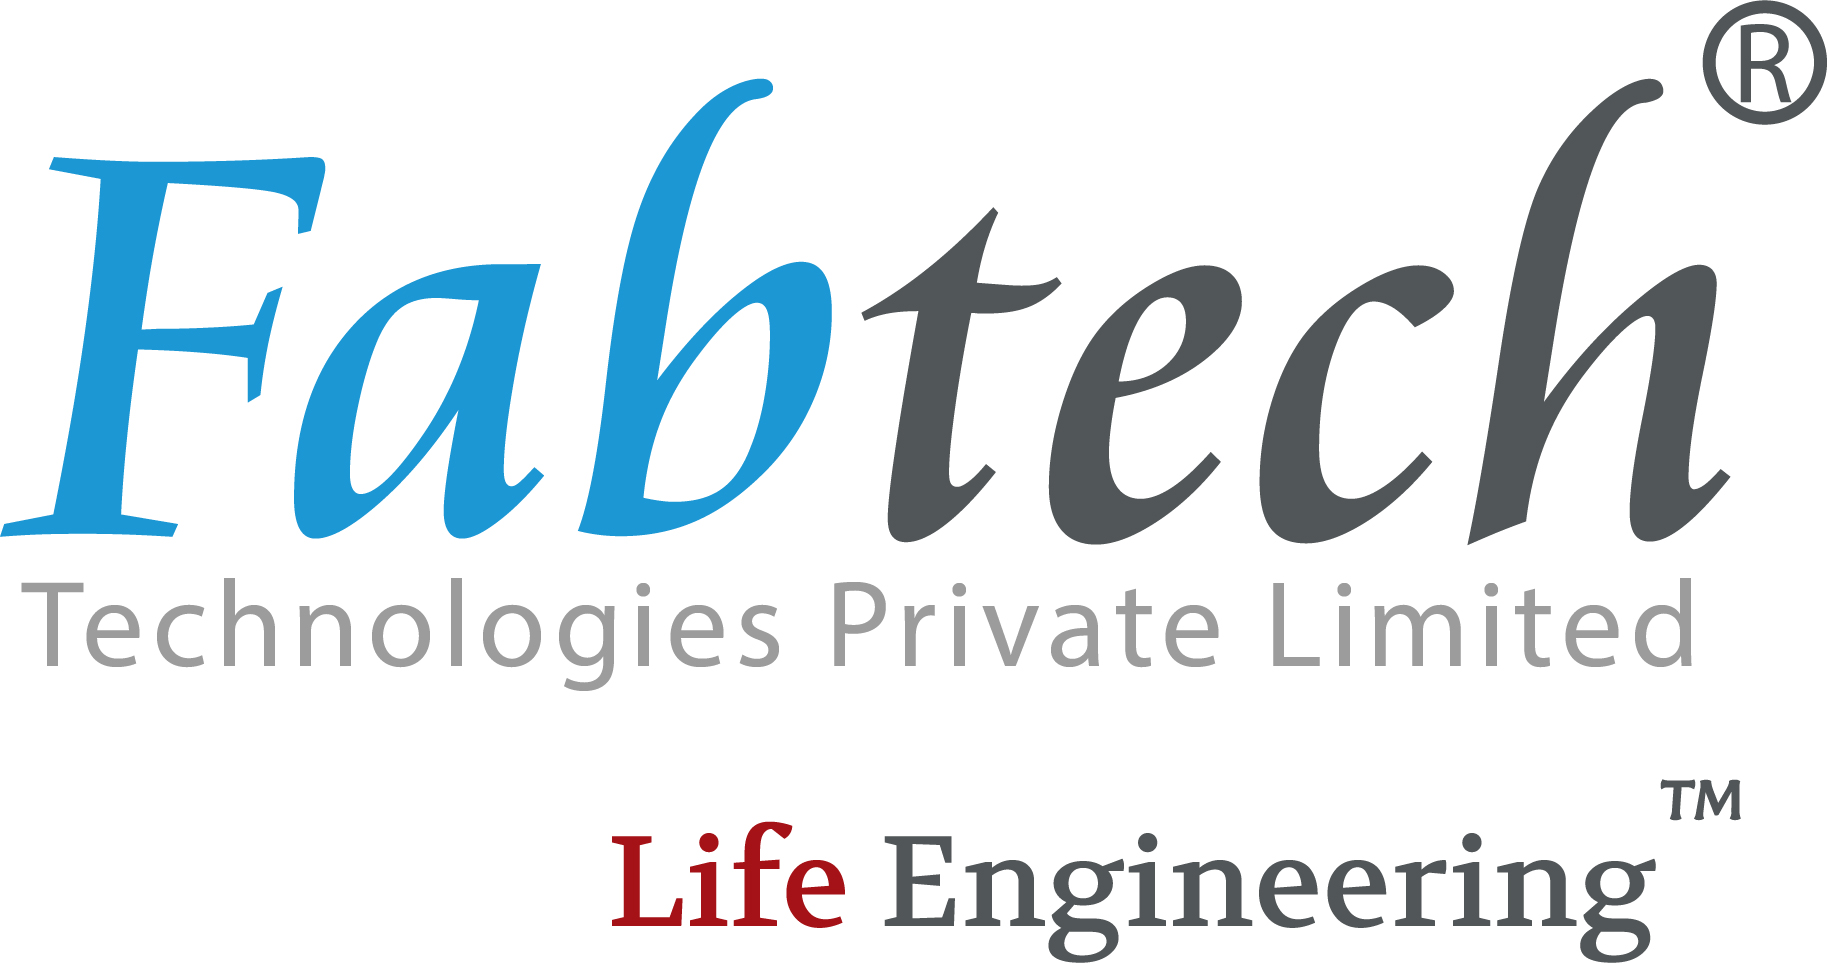 Fabtech Technologies Private Limited